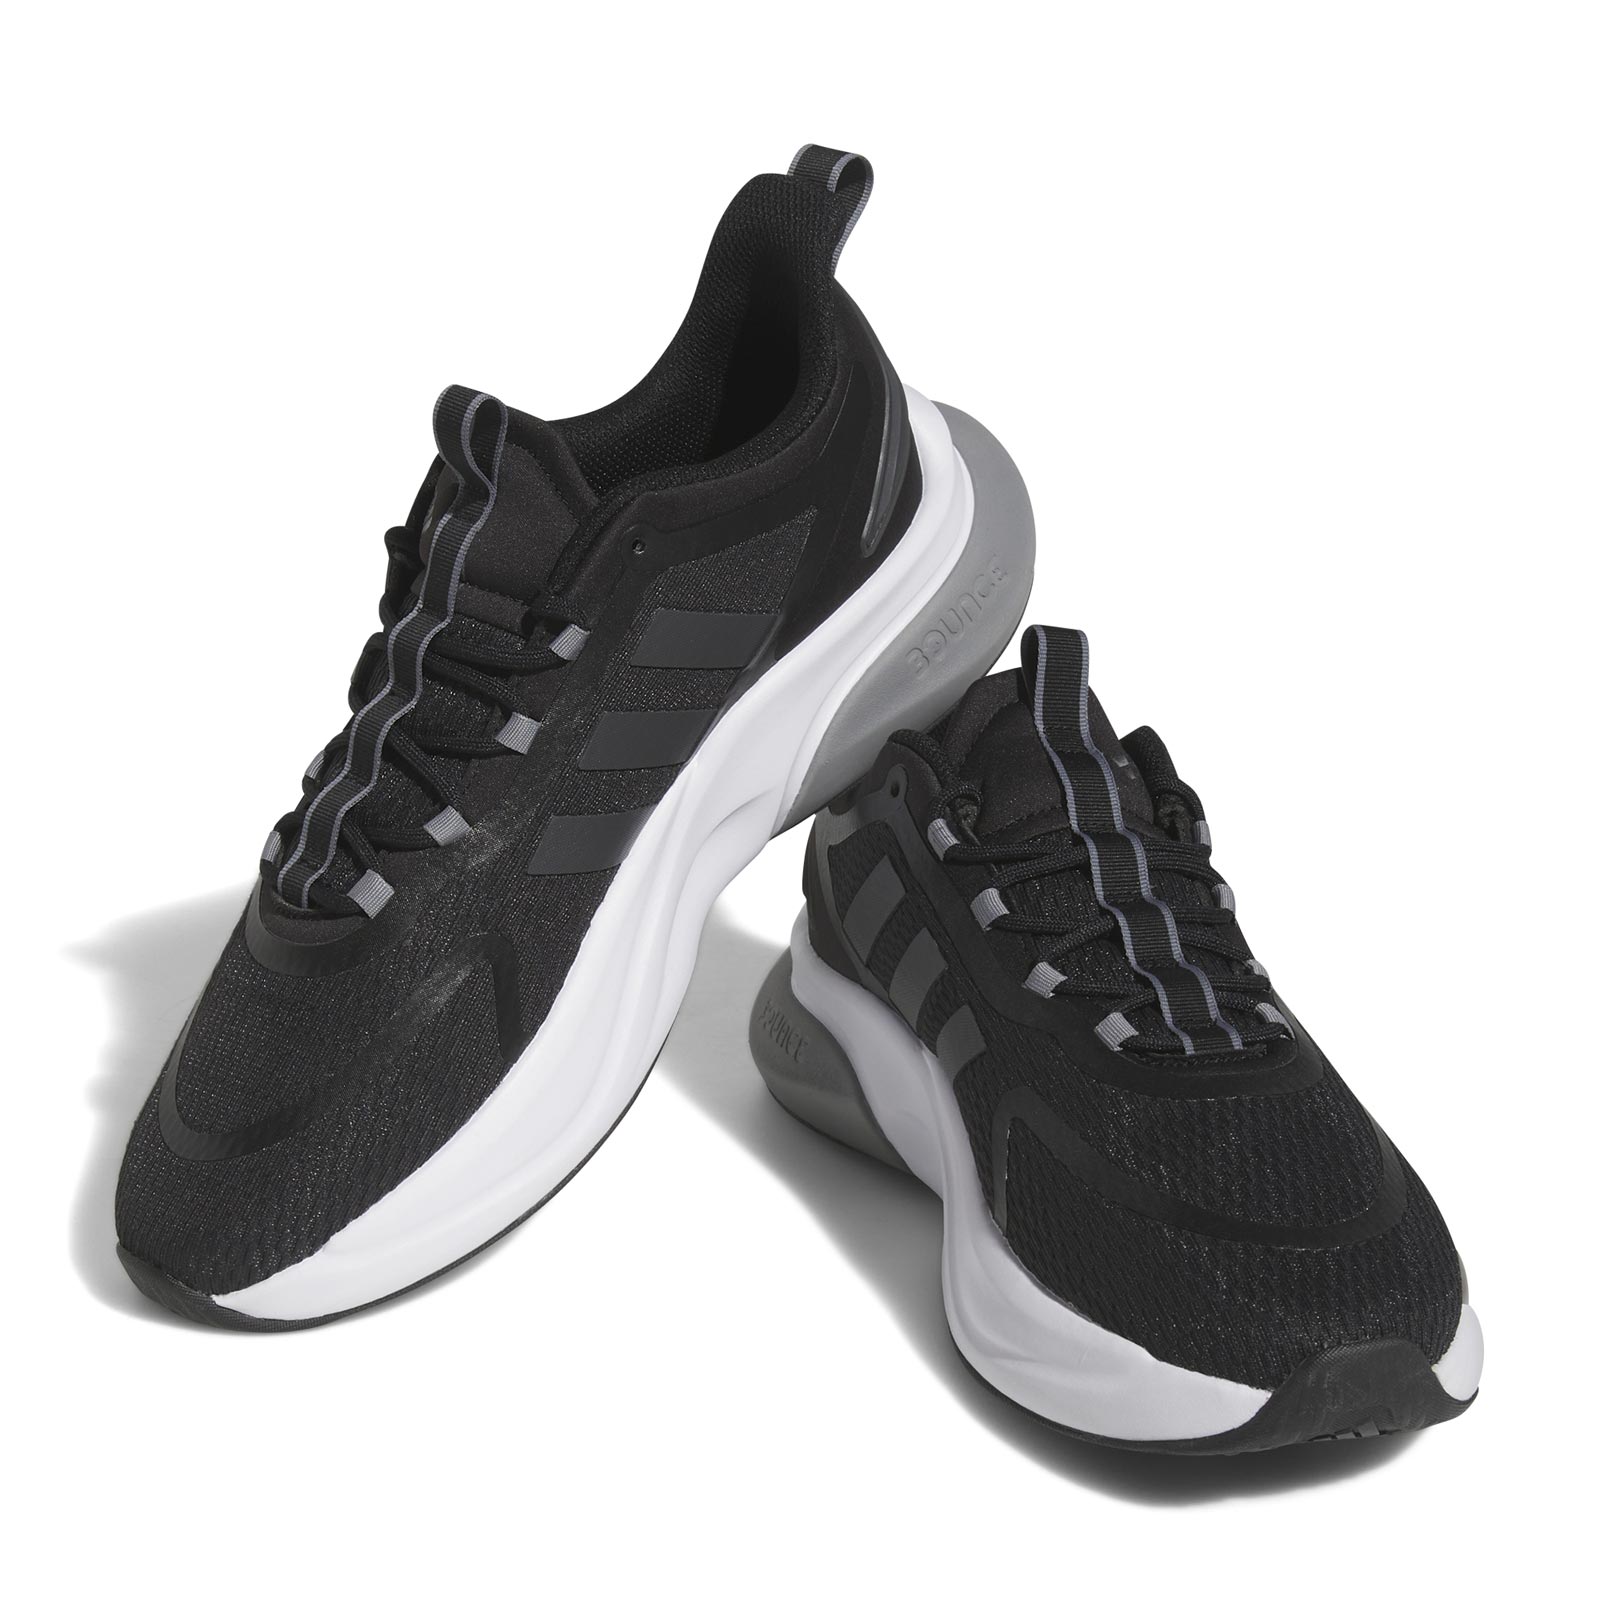 adidas Alphabounce+ Sustainable Bounce Lifestyle Mens Running Shoes